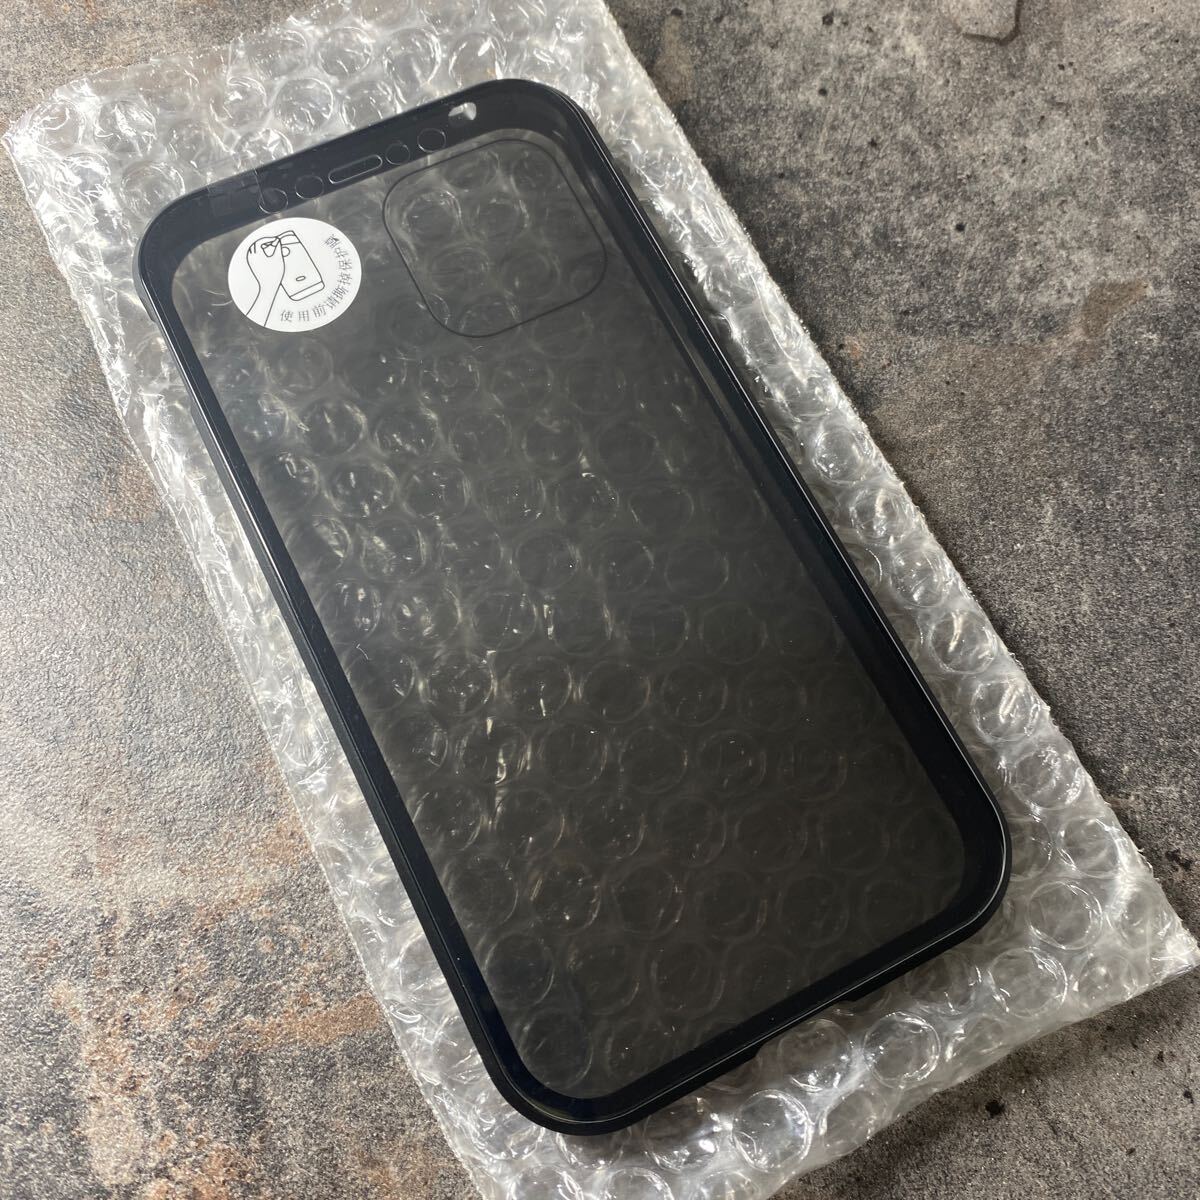 A4* case / cover aluminum van pa- clear transparent both sides rom and rear (before and after) glass magnet [ rom and rear (before and after) glass +.. see prevention ] ([ iPhone12 Pro ( black )])